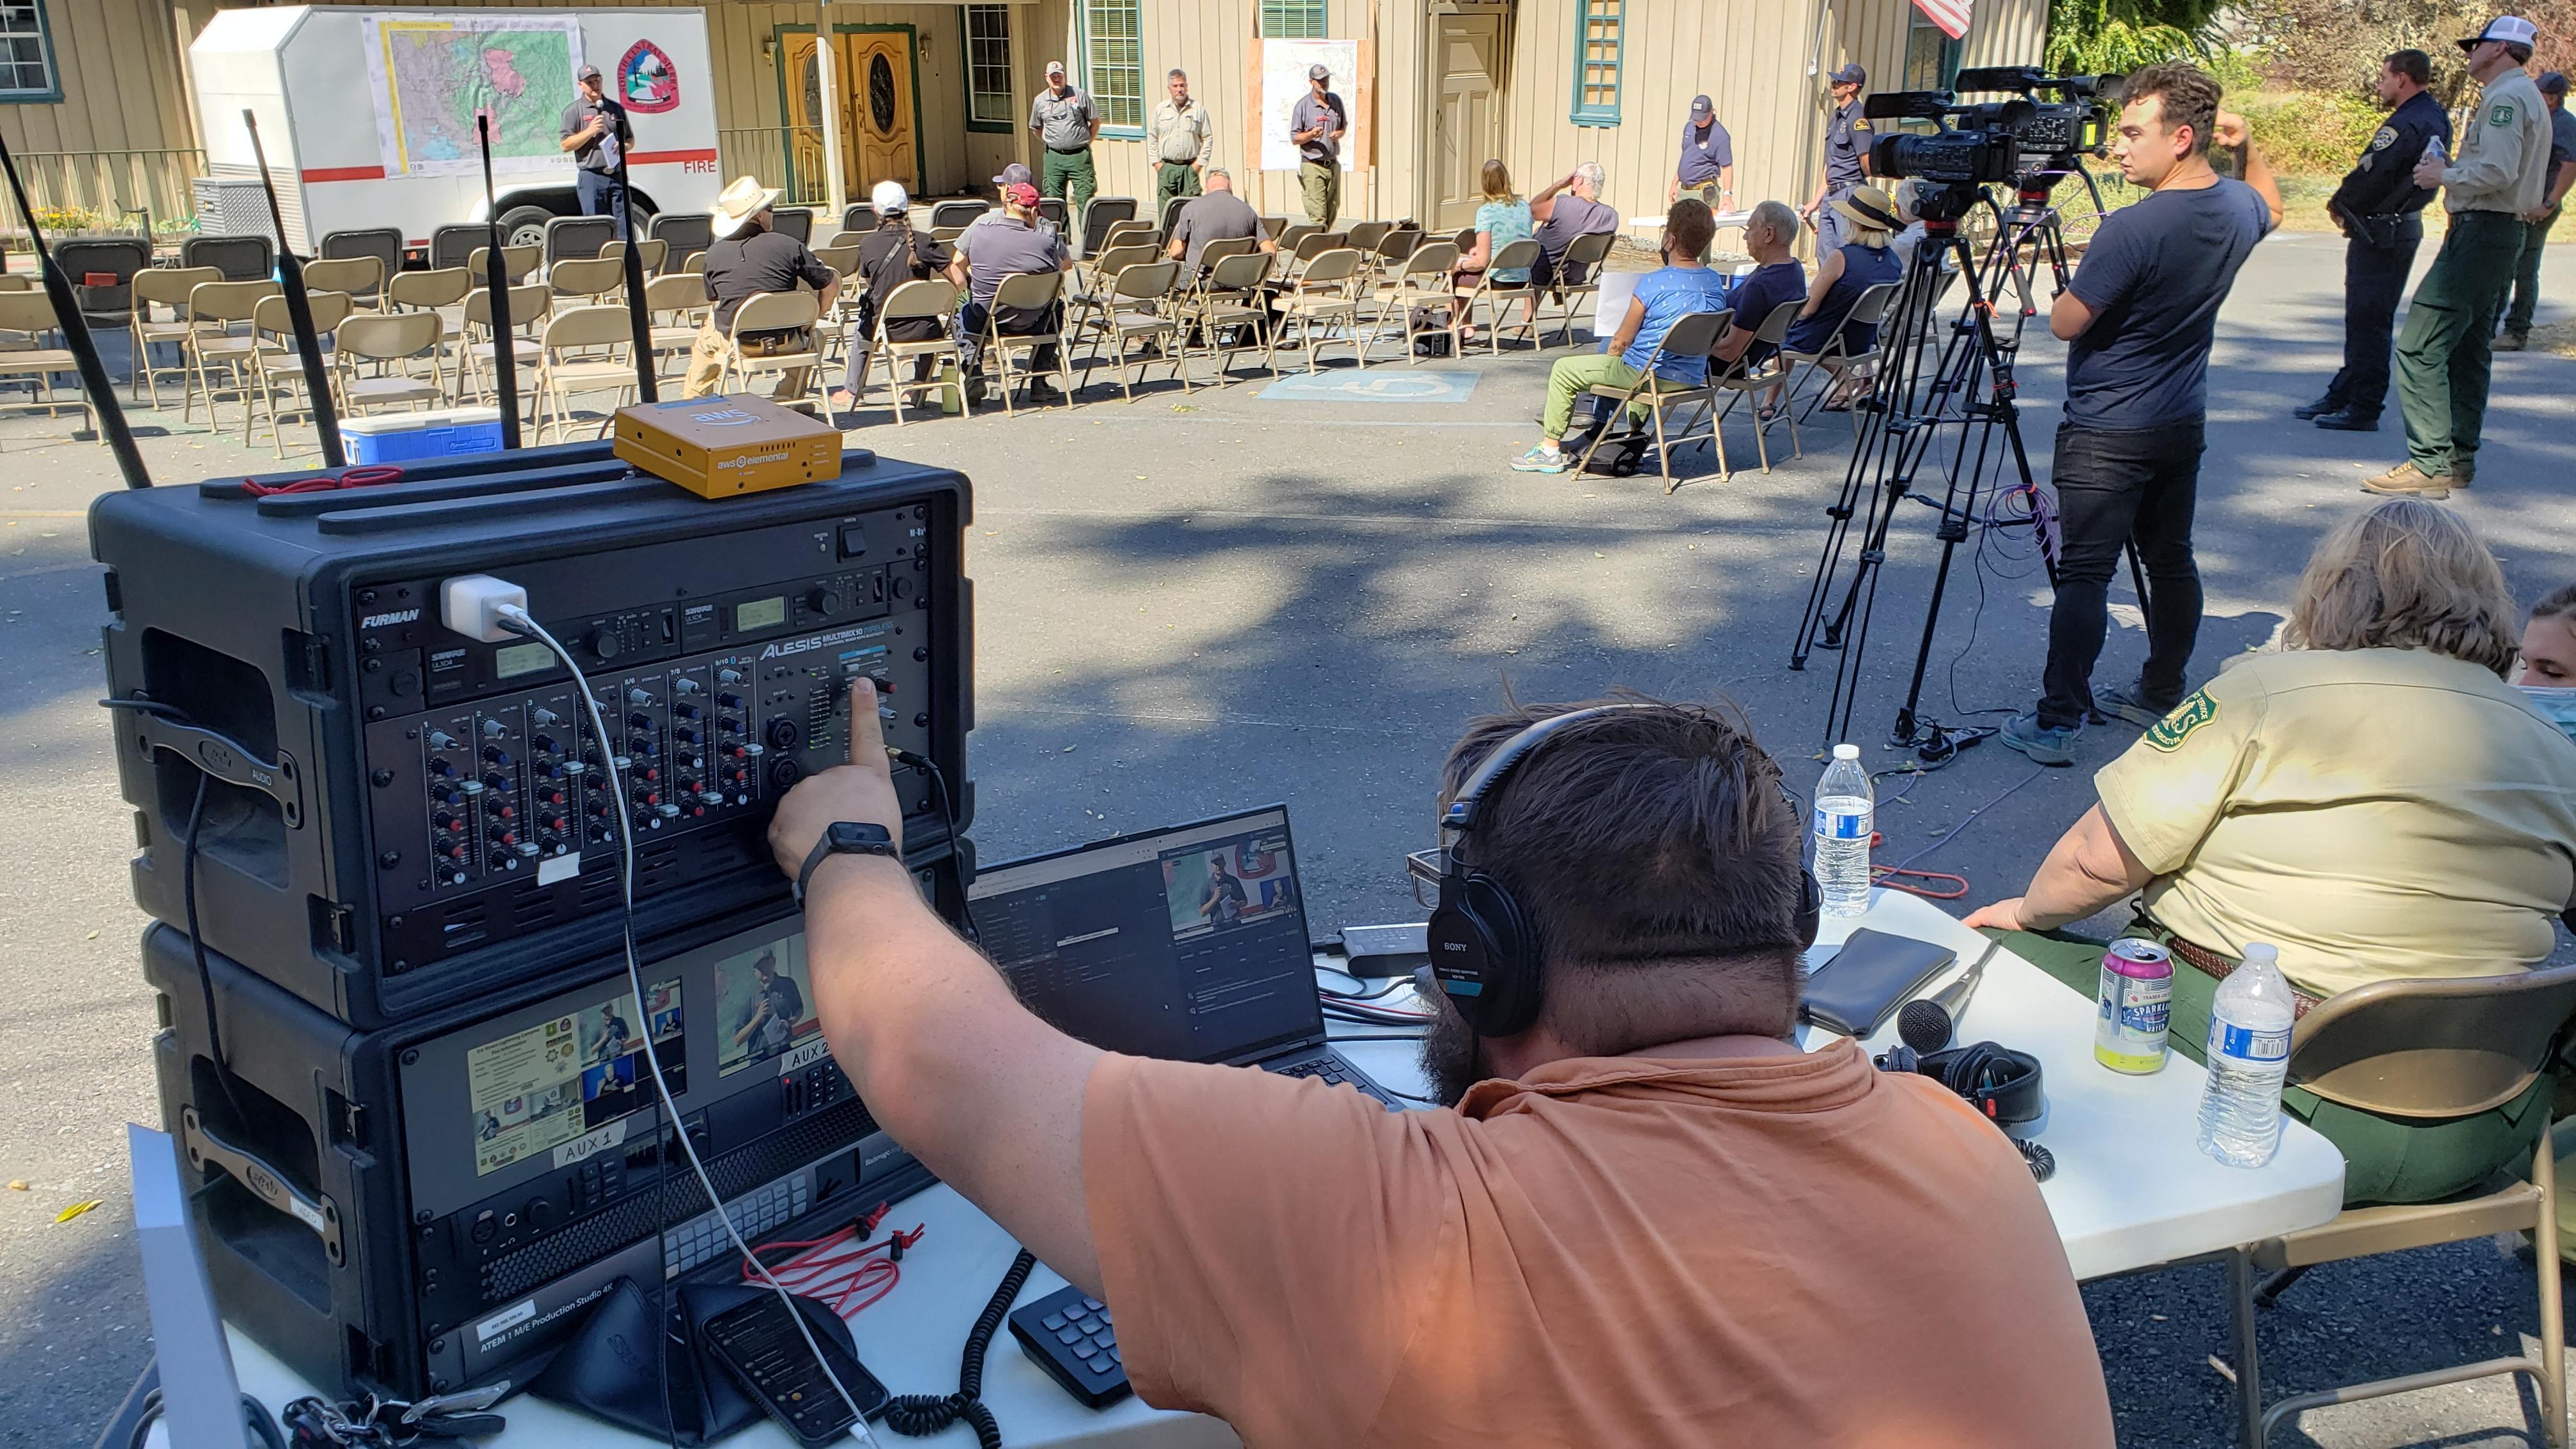 A member of a video production company uses equipment to broadcast a community meeting for CAIIMT14 to Facebook Live